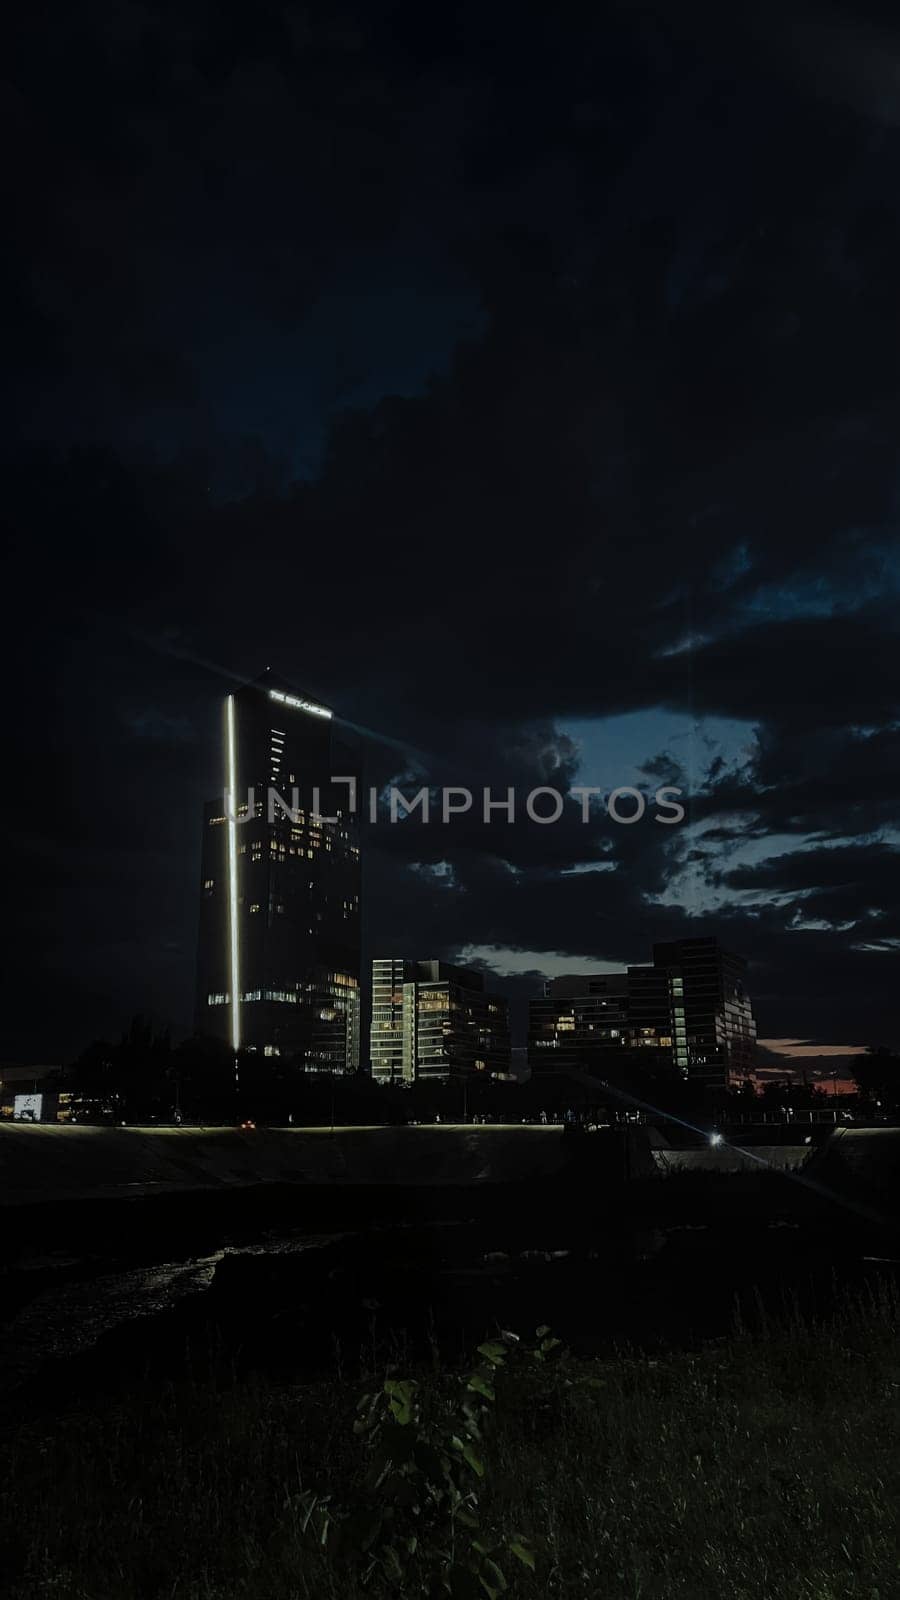 Cityscape of downtown buildings illuminated at night with a dramatic cloudy sky by Pukhovskiy